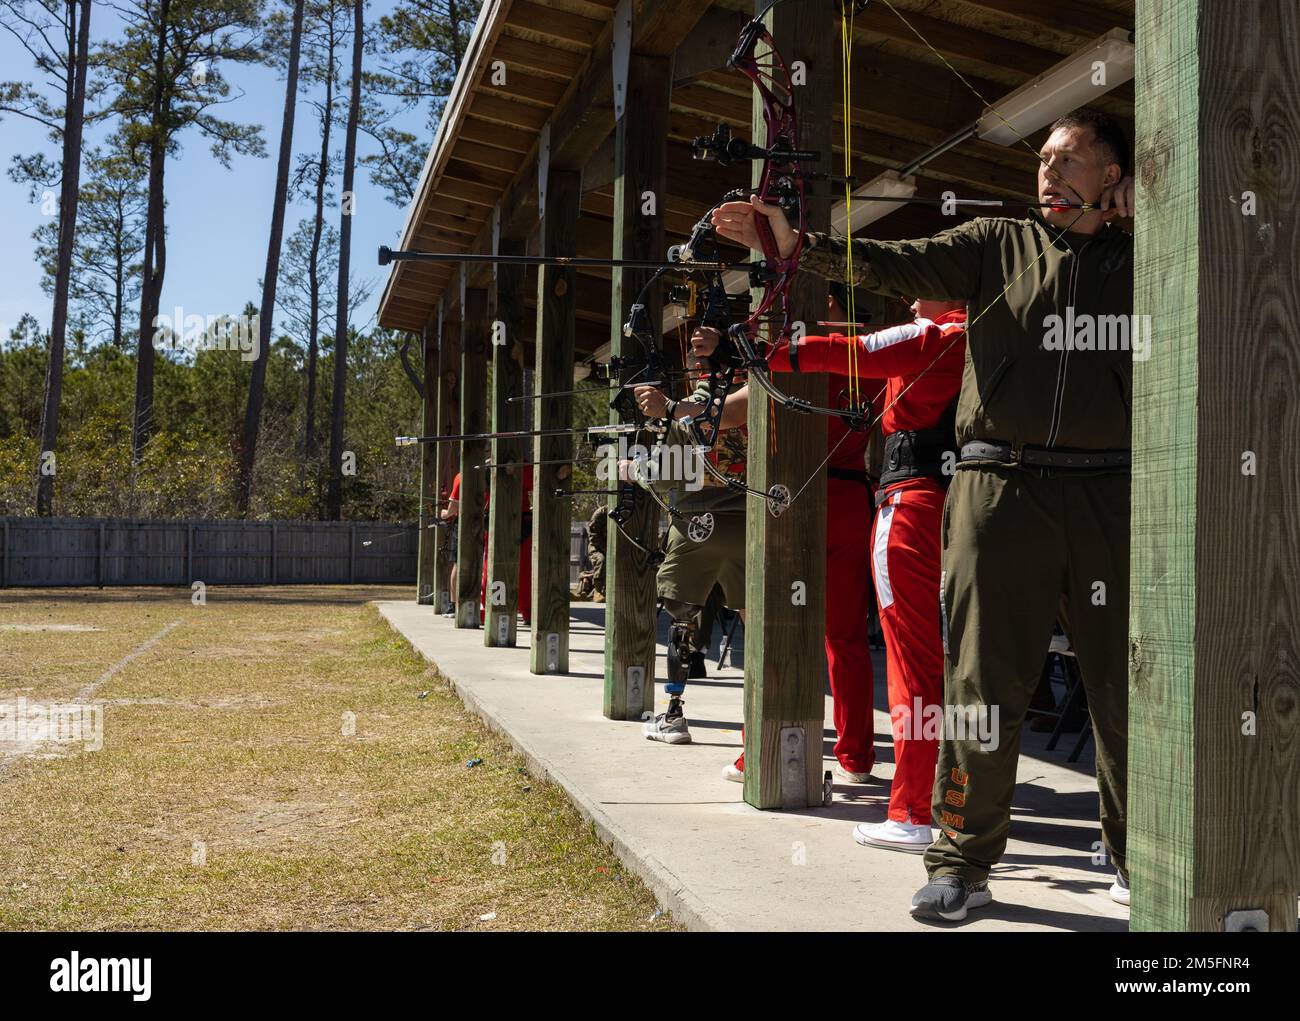 U.S. Marines with Wounded Warrior Battalion East participate in the 2022 East Coast Marine Corps Trials archery competition on Marine Corps Base Camp Lejeune, North Carolina, March 14, 2022. The Marine Corps Trials is an annual adaptive sports competition that promotes a competitive warrior spirit, builds camaraderie and provides a venue to select participants for the 2022 DoD Warrior Games. Stock Photo